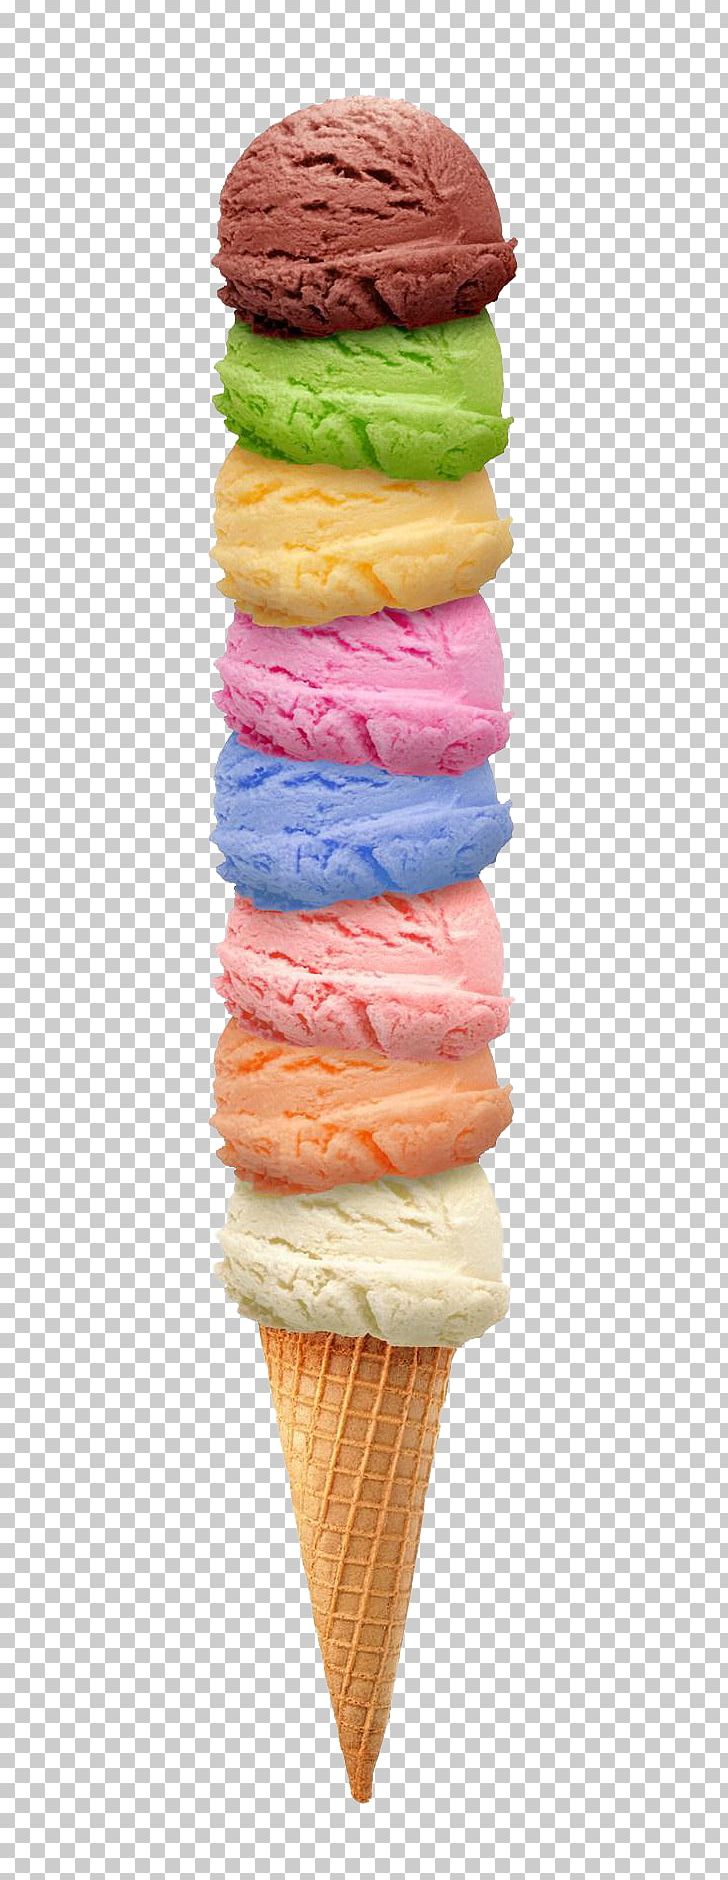 Ice Cream Cone Ice Cream Social PNG, Clipart, Cone, Cones, Cream, Creative, Dairy Product Free PNG Download